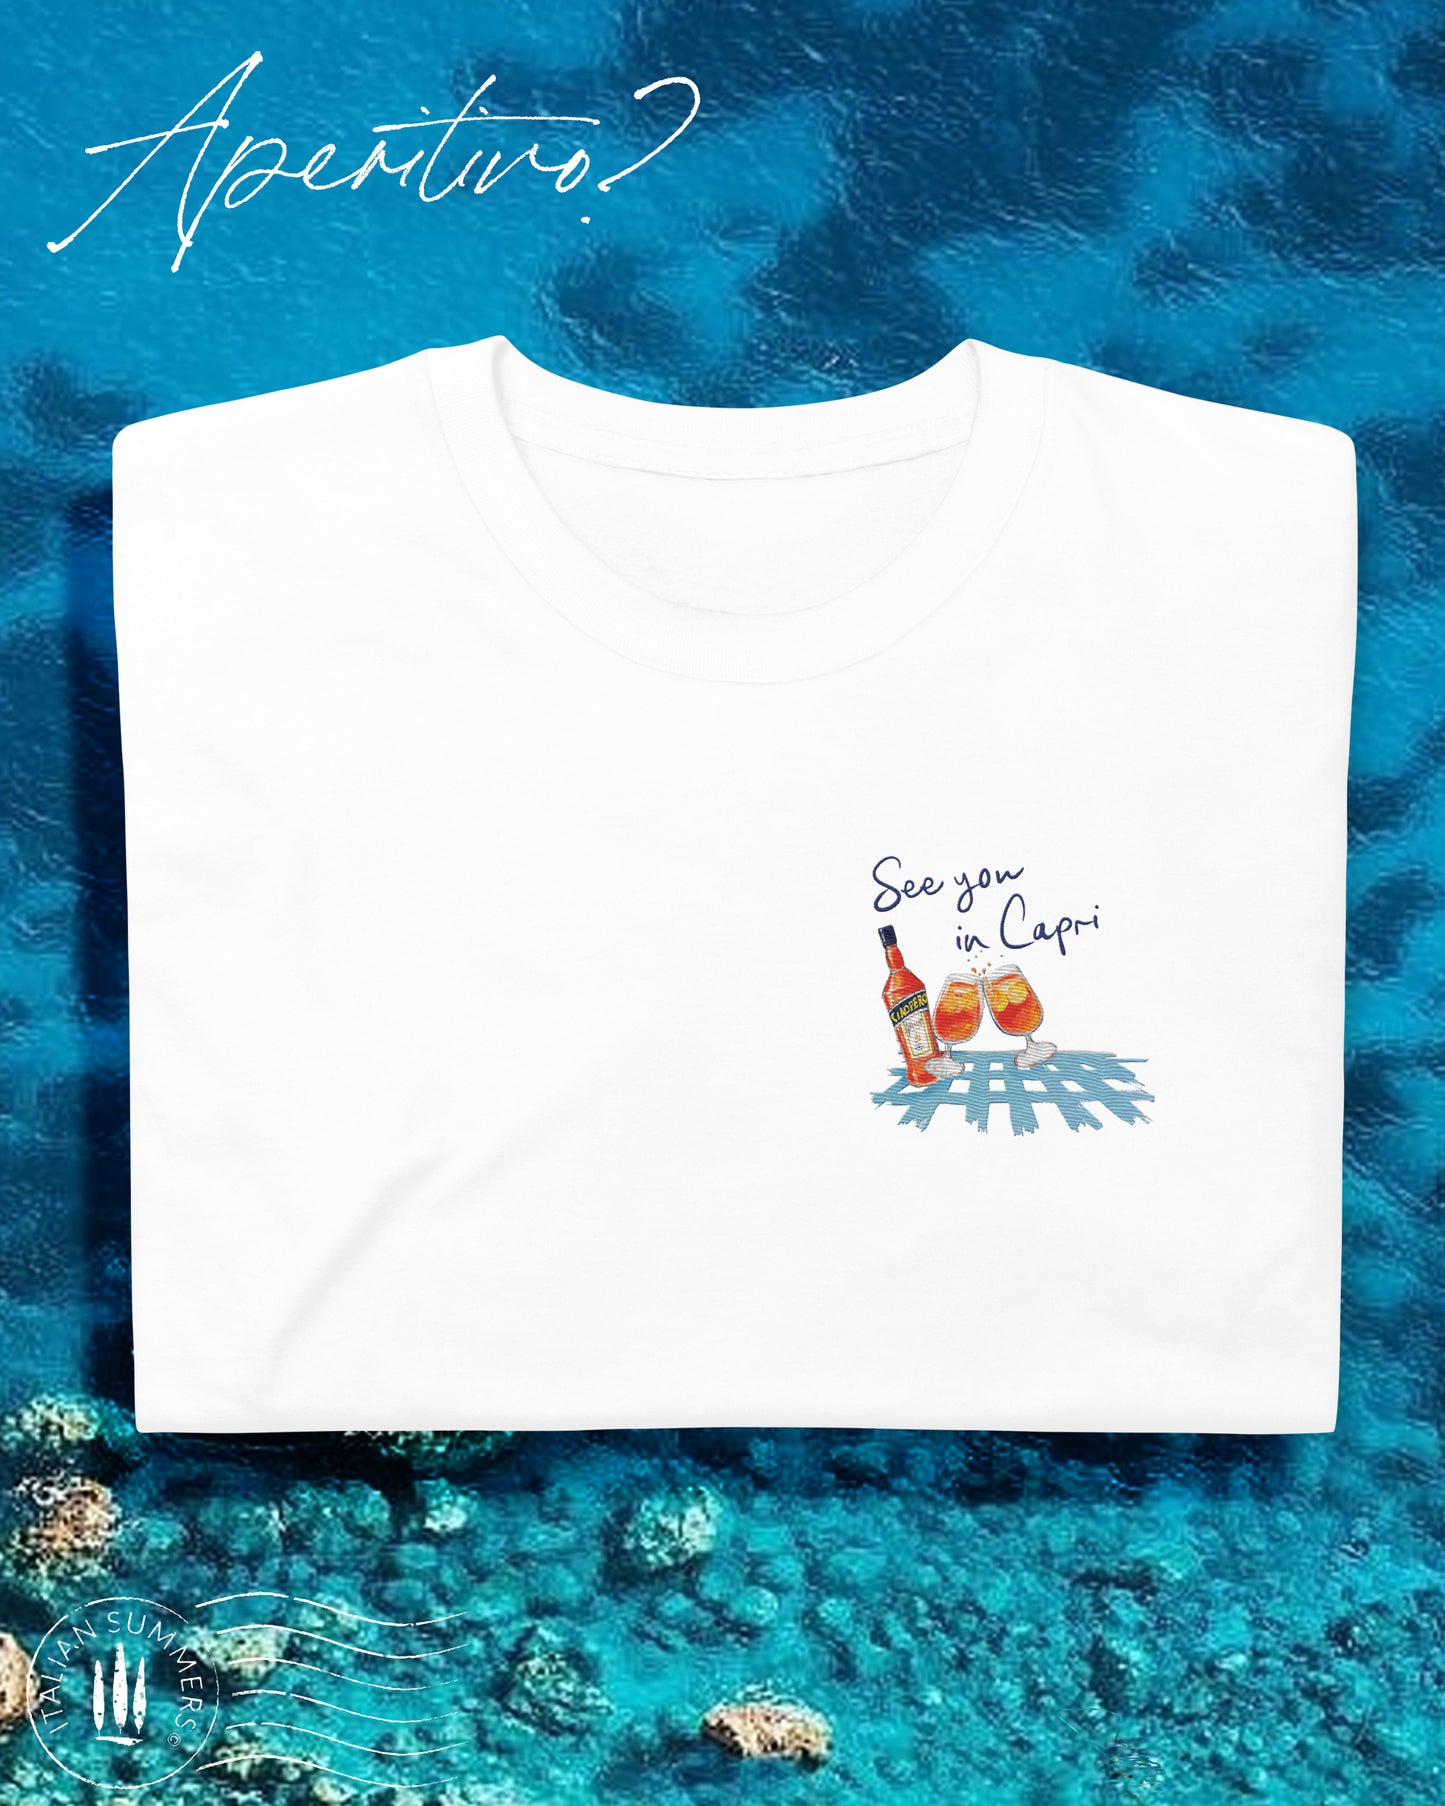 White cotton T shirt with an embroidered illustration on the left chest of two Aperol Spritz glasses in red-orange colors and a Aperol bottle on a blue checkered tablecloth. Above, a Navy blue embroidered quote: See you in CAPRI